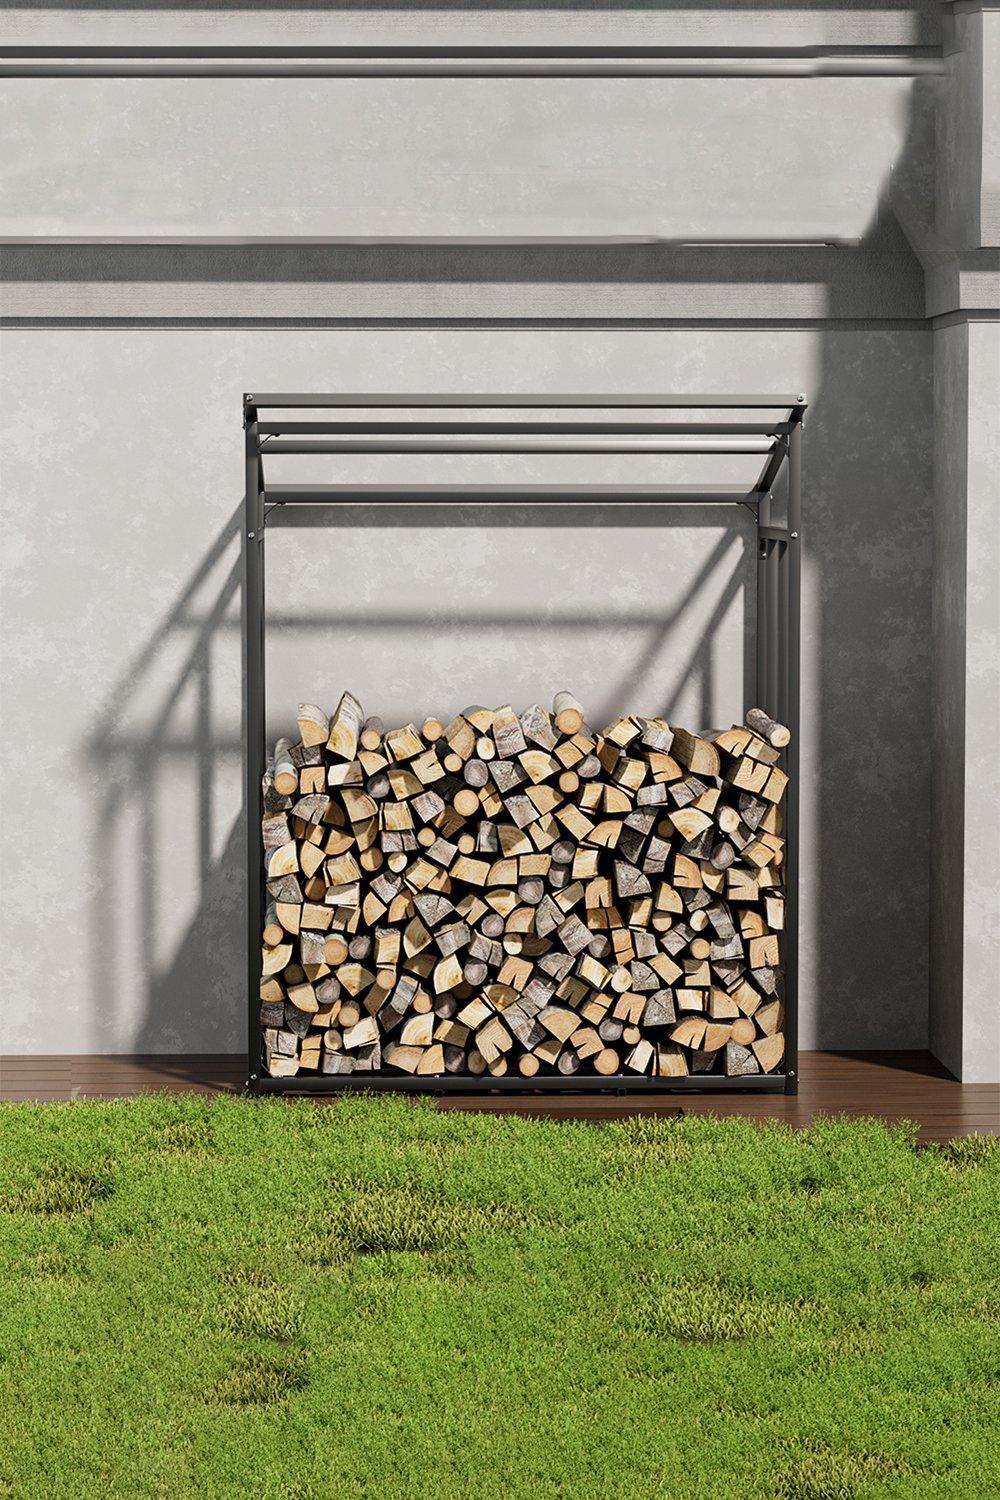 3.6 ft W x 2.3 ft D Small Metal Tube Firewood Rack with Roof